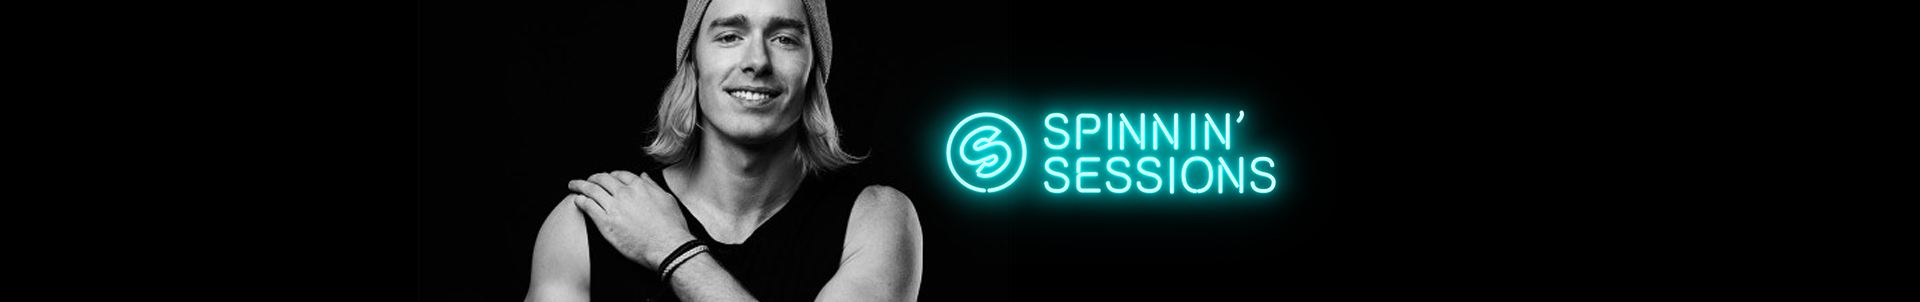 We Rave You premiere: Spinnin’ Sessions Radio Show with a guest mix by Will Sparks